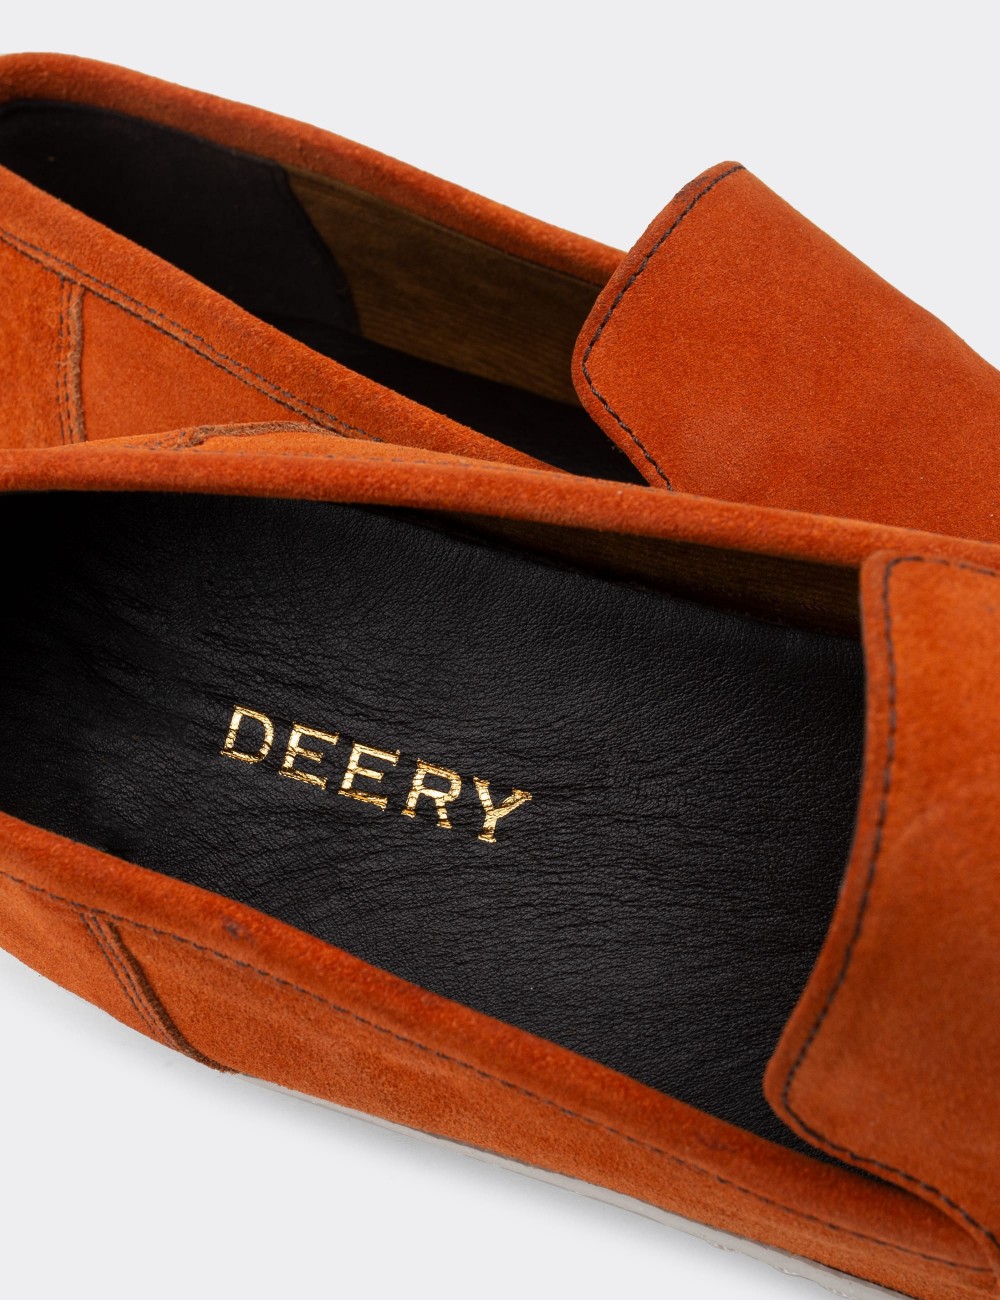 Orange Suede Leather Loafers - 01865MTRCC01